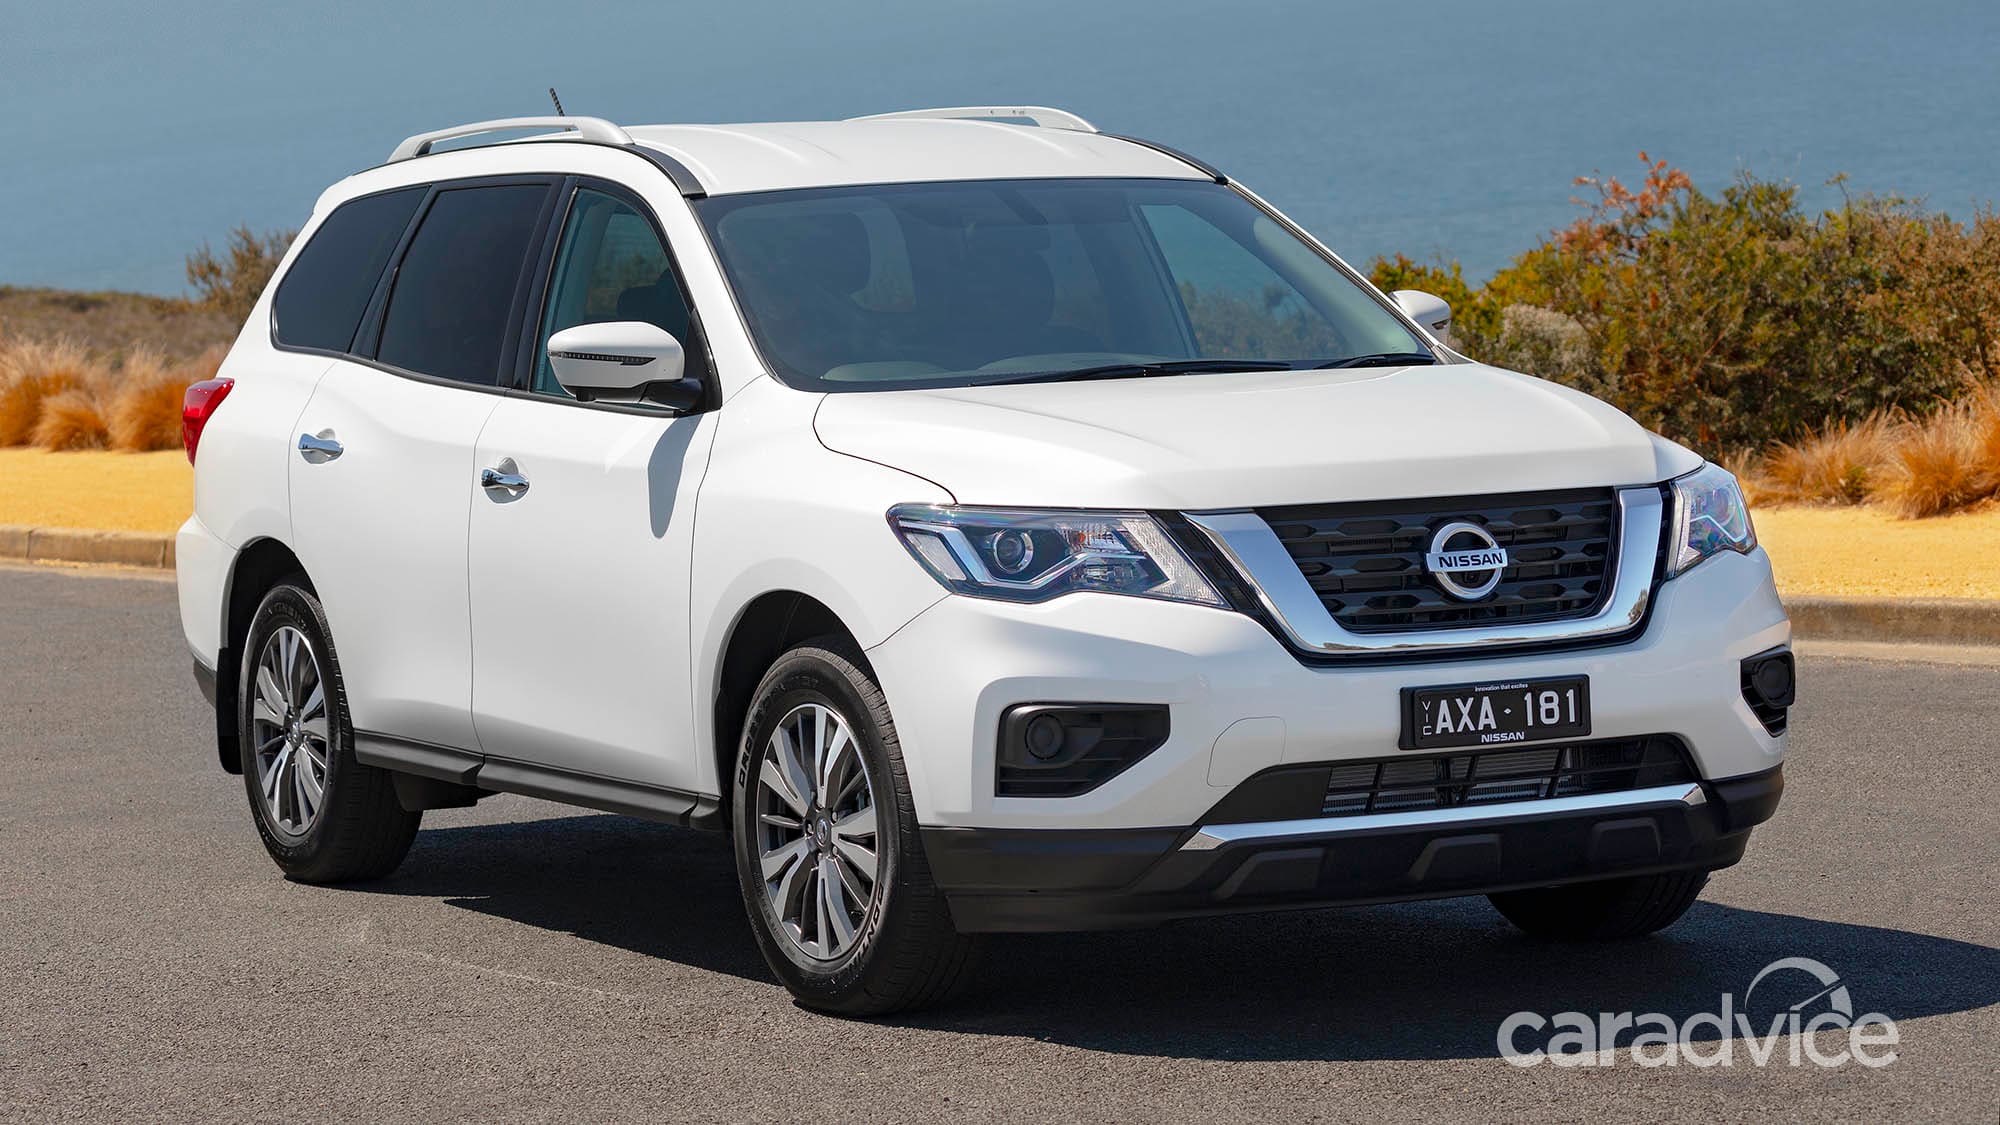 2019 Nissan Pathfinder pricing and specs CarAdvice